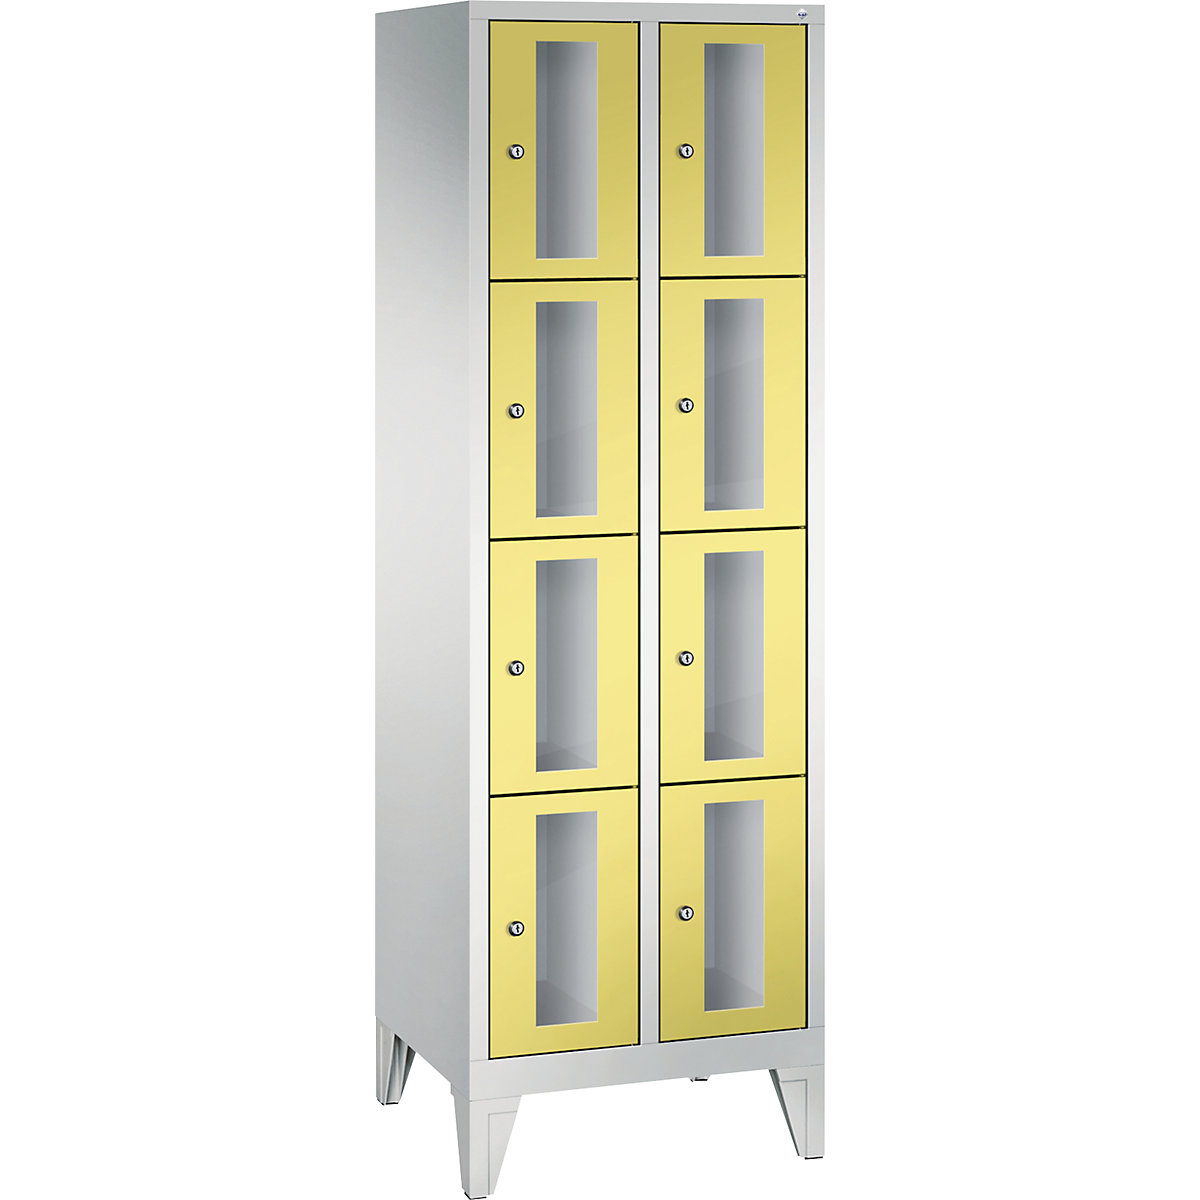 C+P – CLASSIC locker unit, compartment height 375 mm, with feet, 8 compartments, width 610 mm, sulphur yellow door